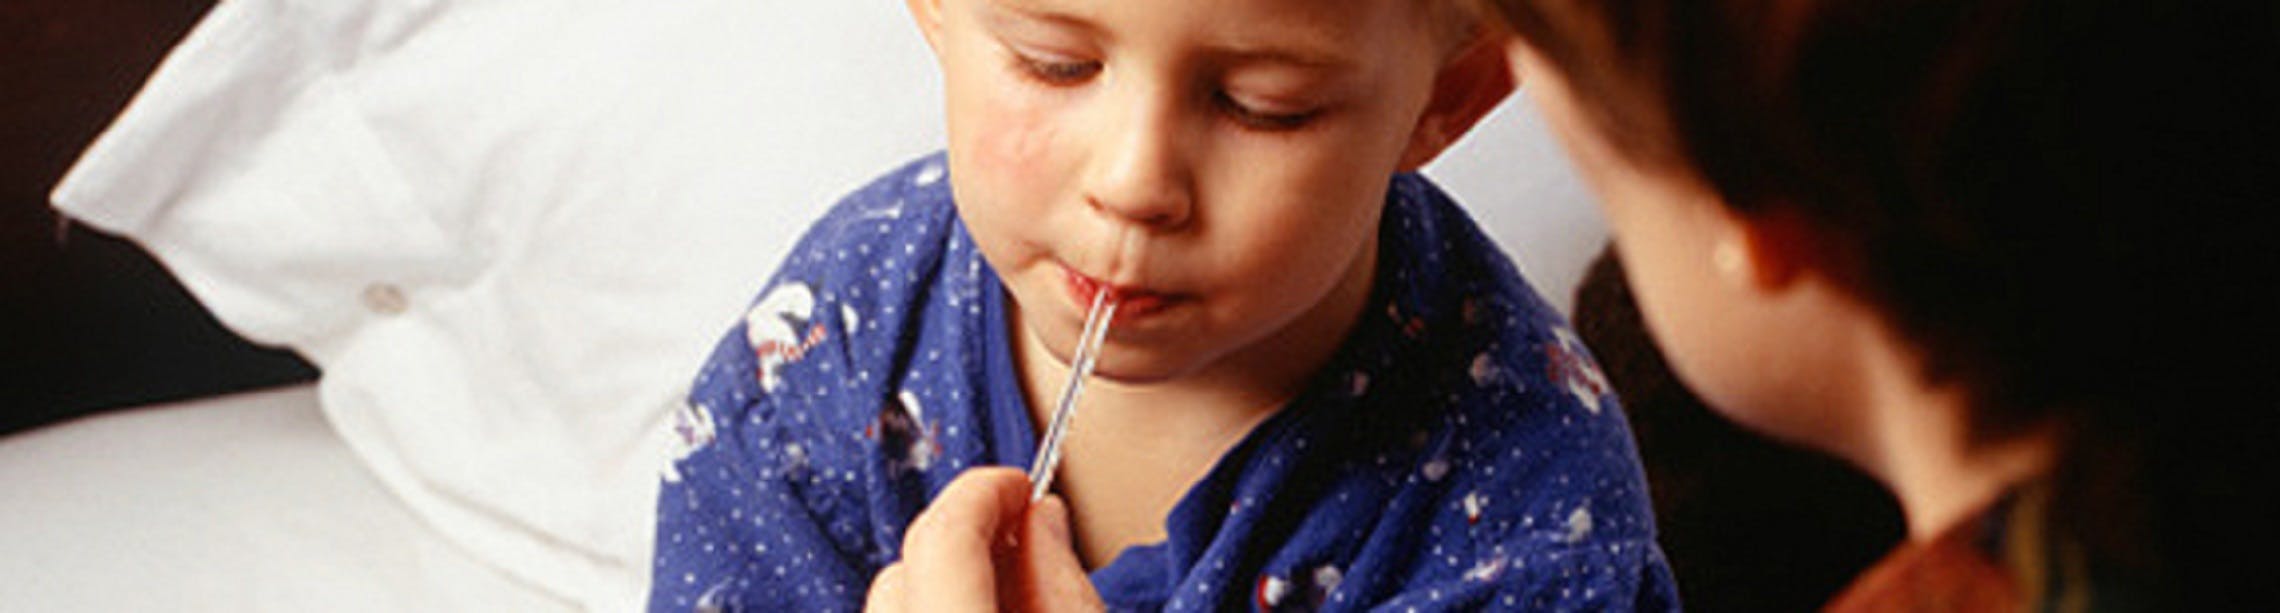 Treating Your Child's Fever